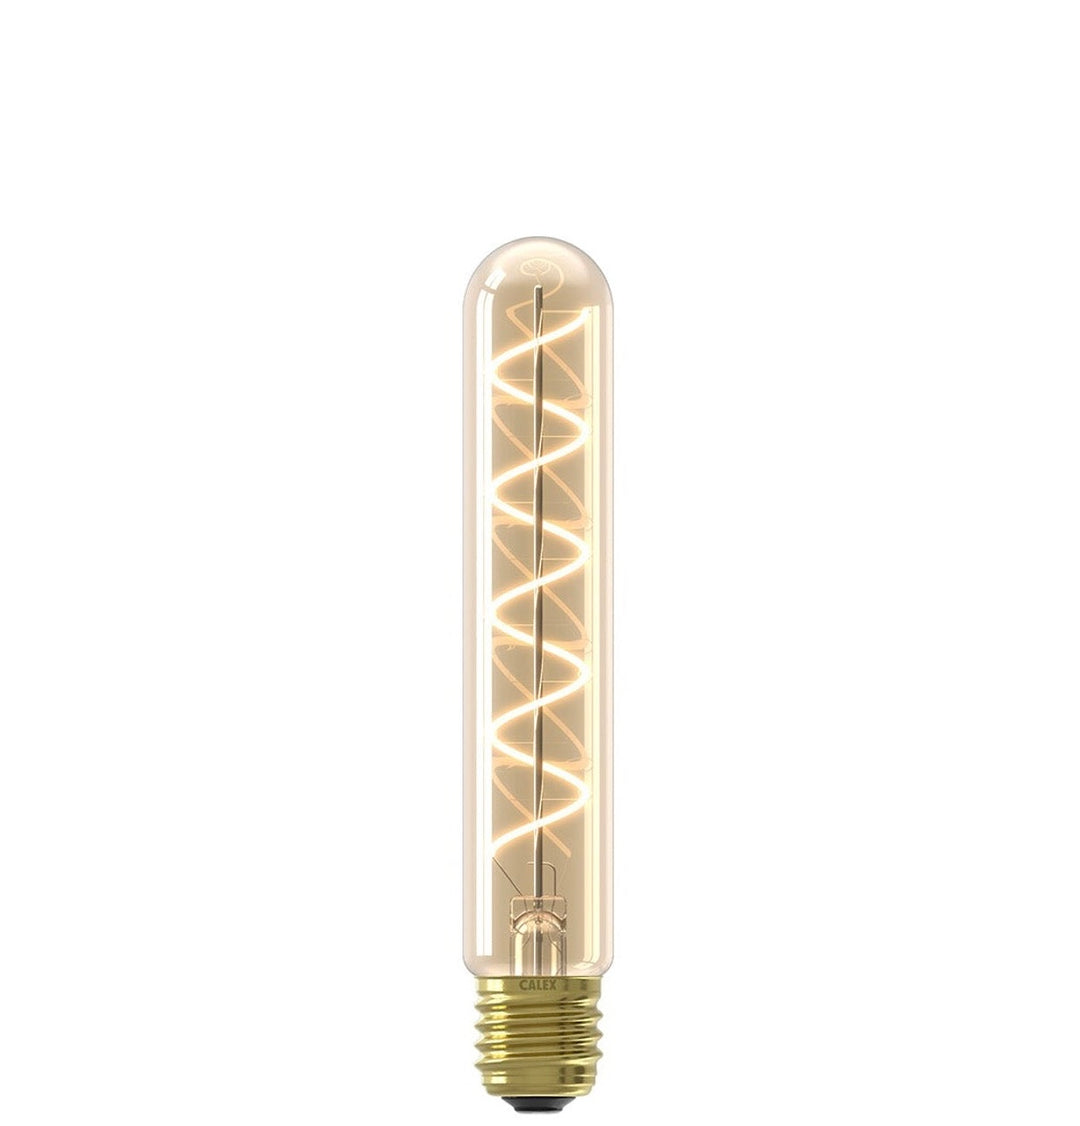 Calex Tube T32x185 Gold Flex Filament, E27, Dimmable with LED Dimmer